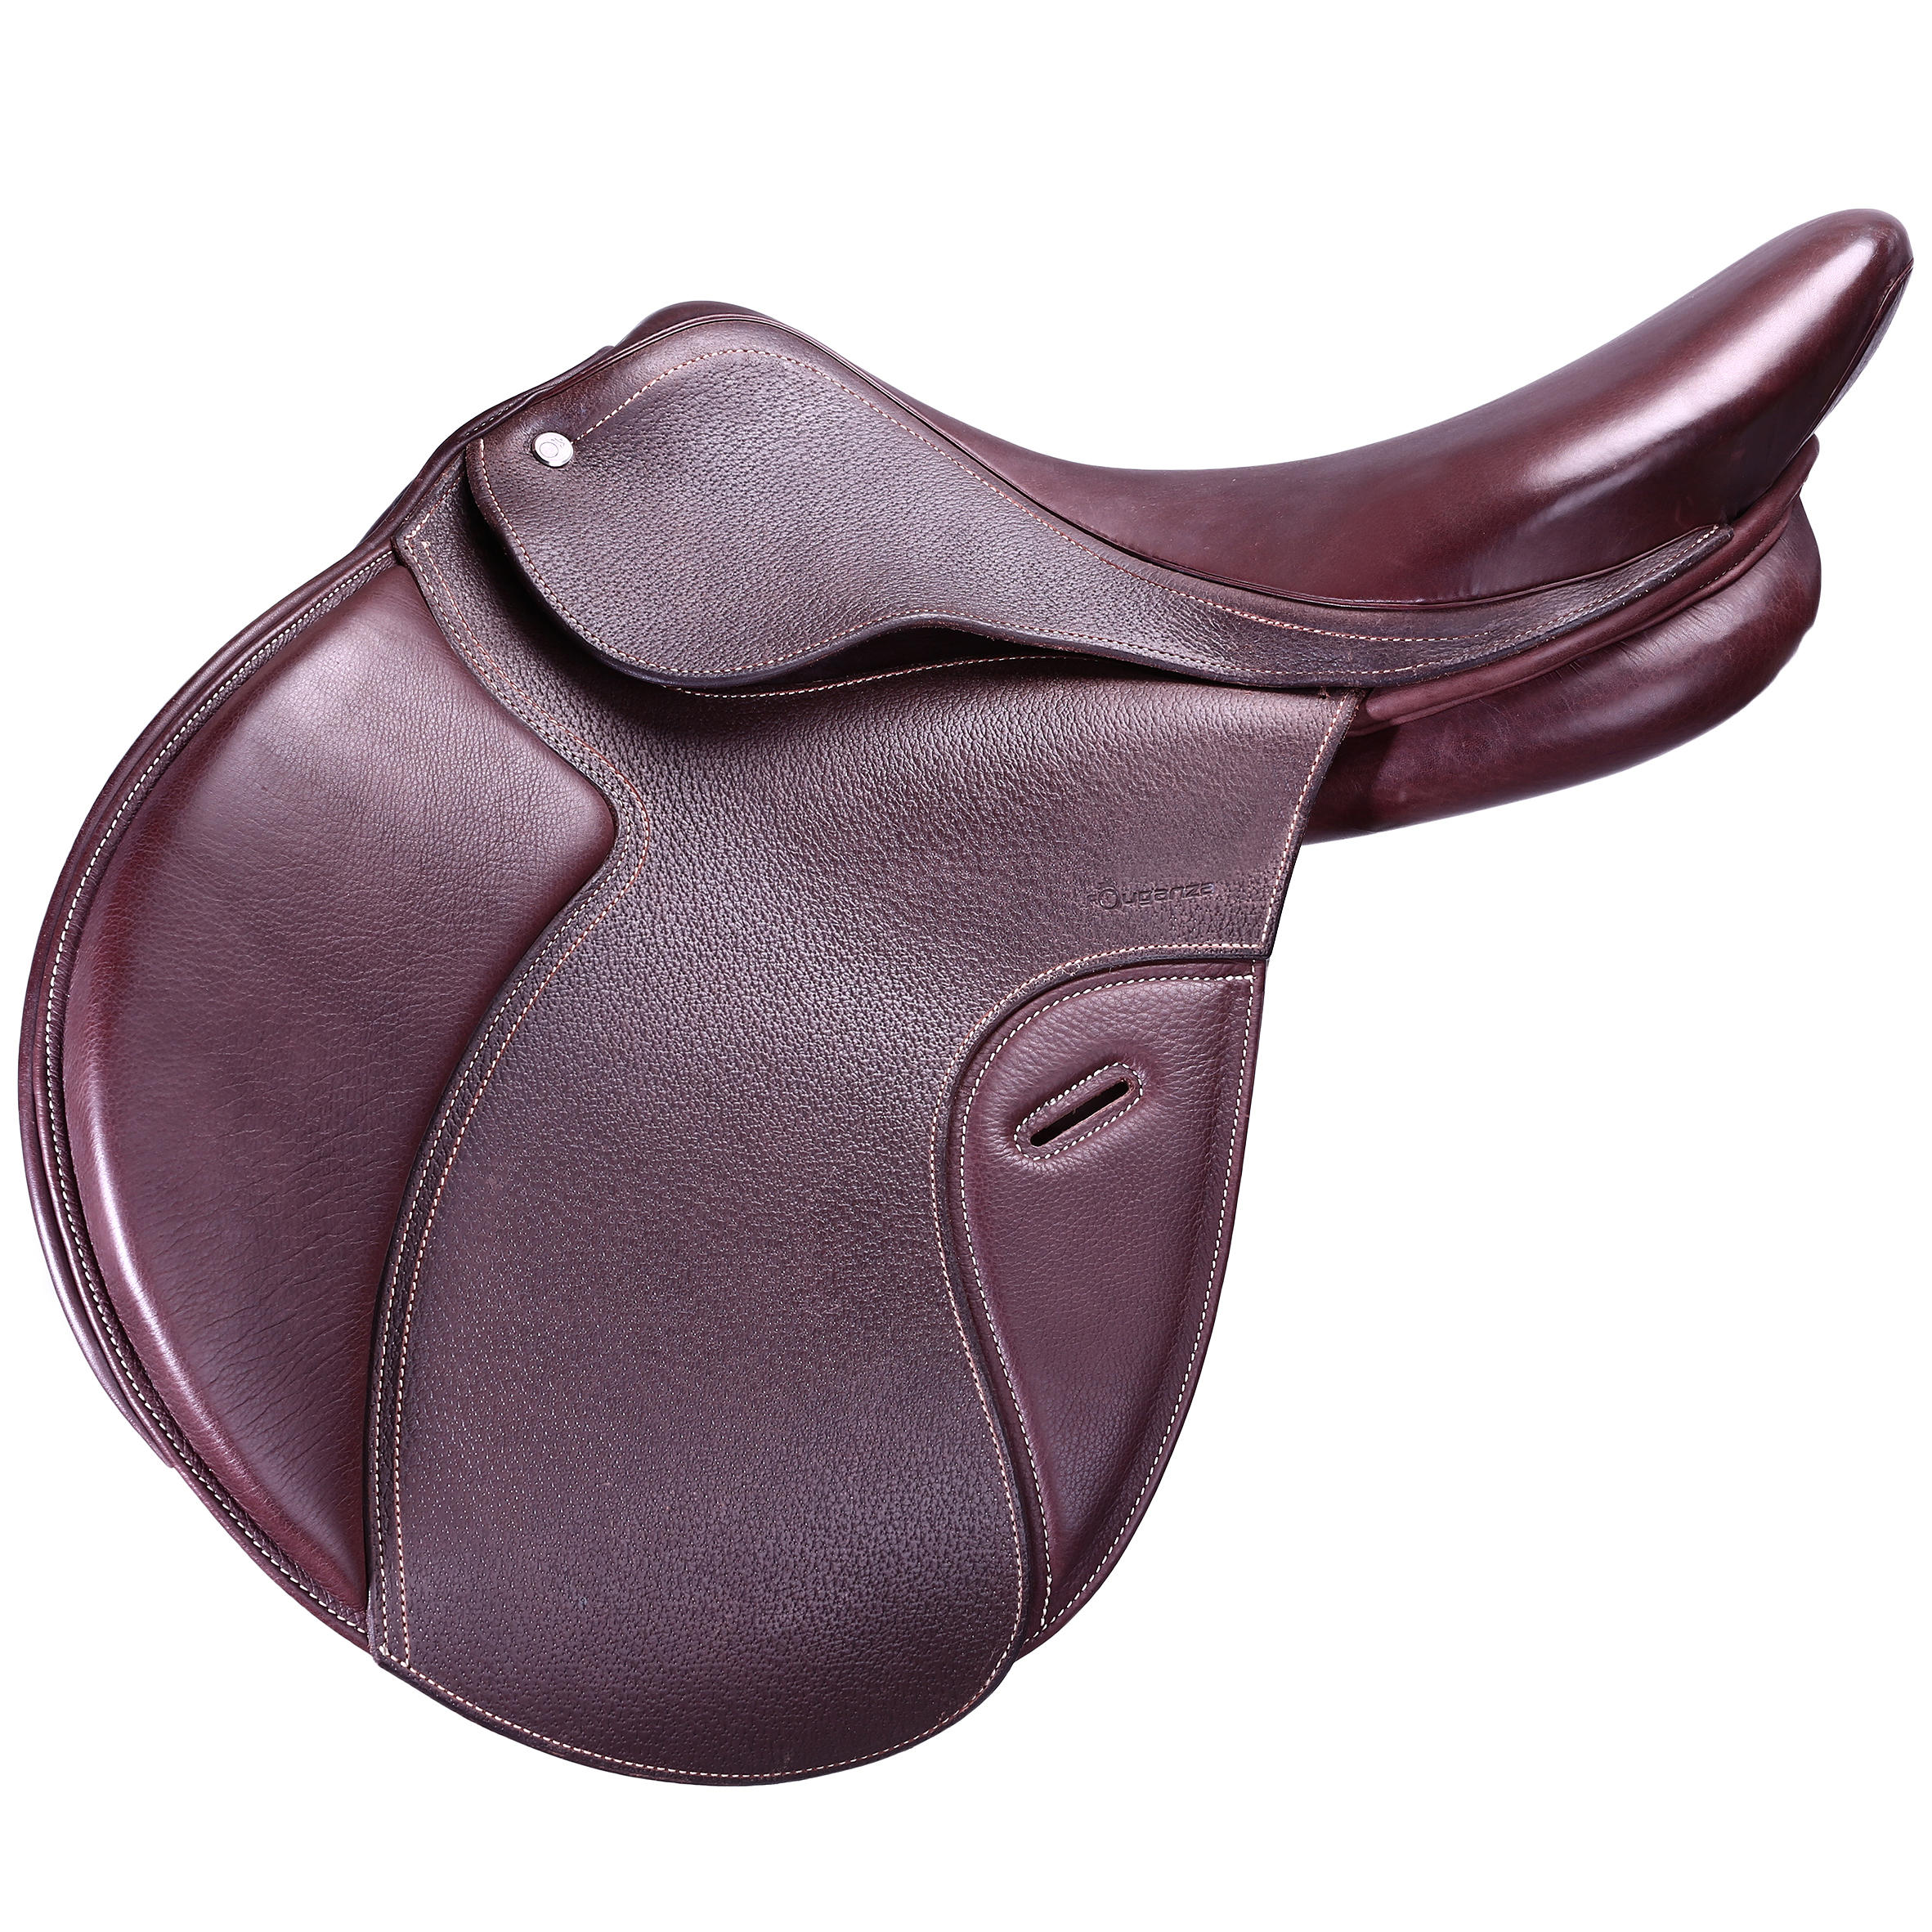 Horse Riding Versatile Leather Saddle for Horse Paddock 17.5" - Brown - FOUGANZA